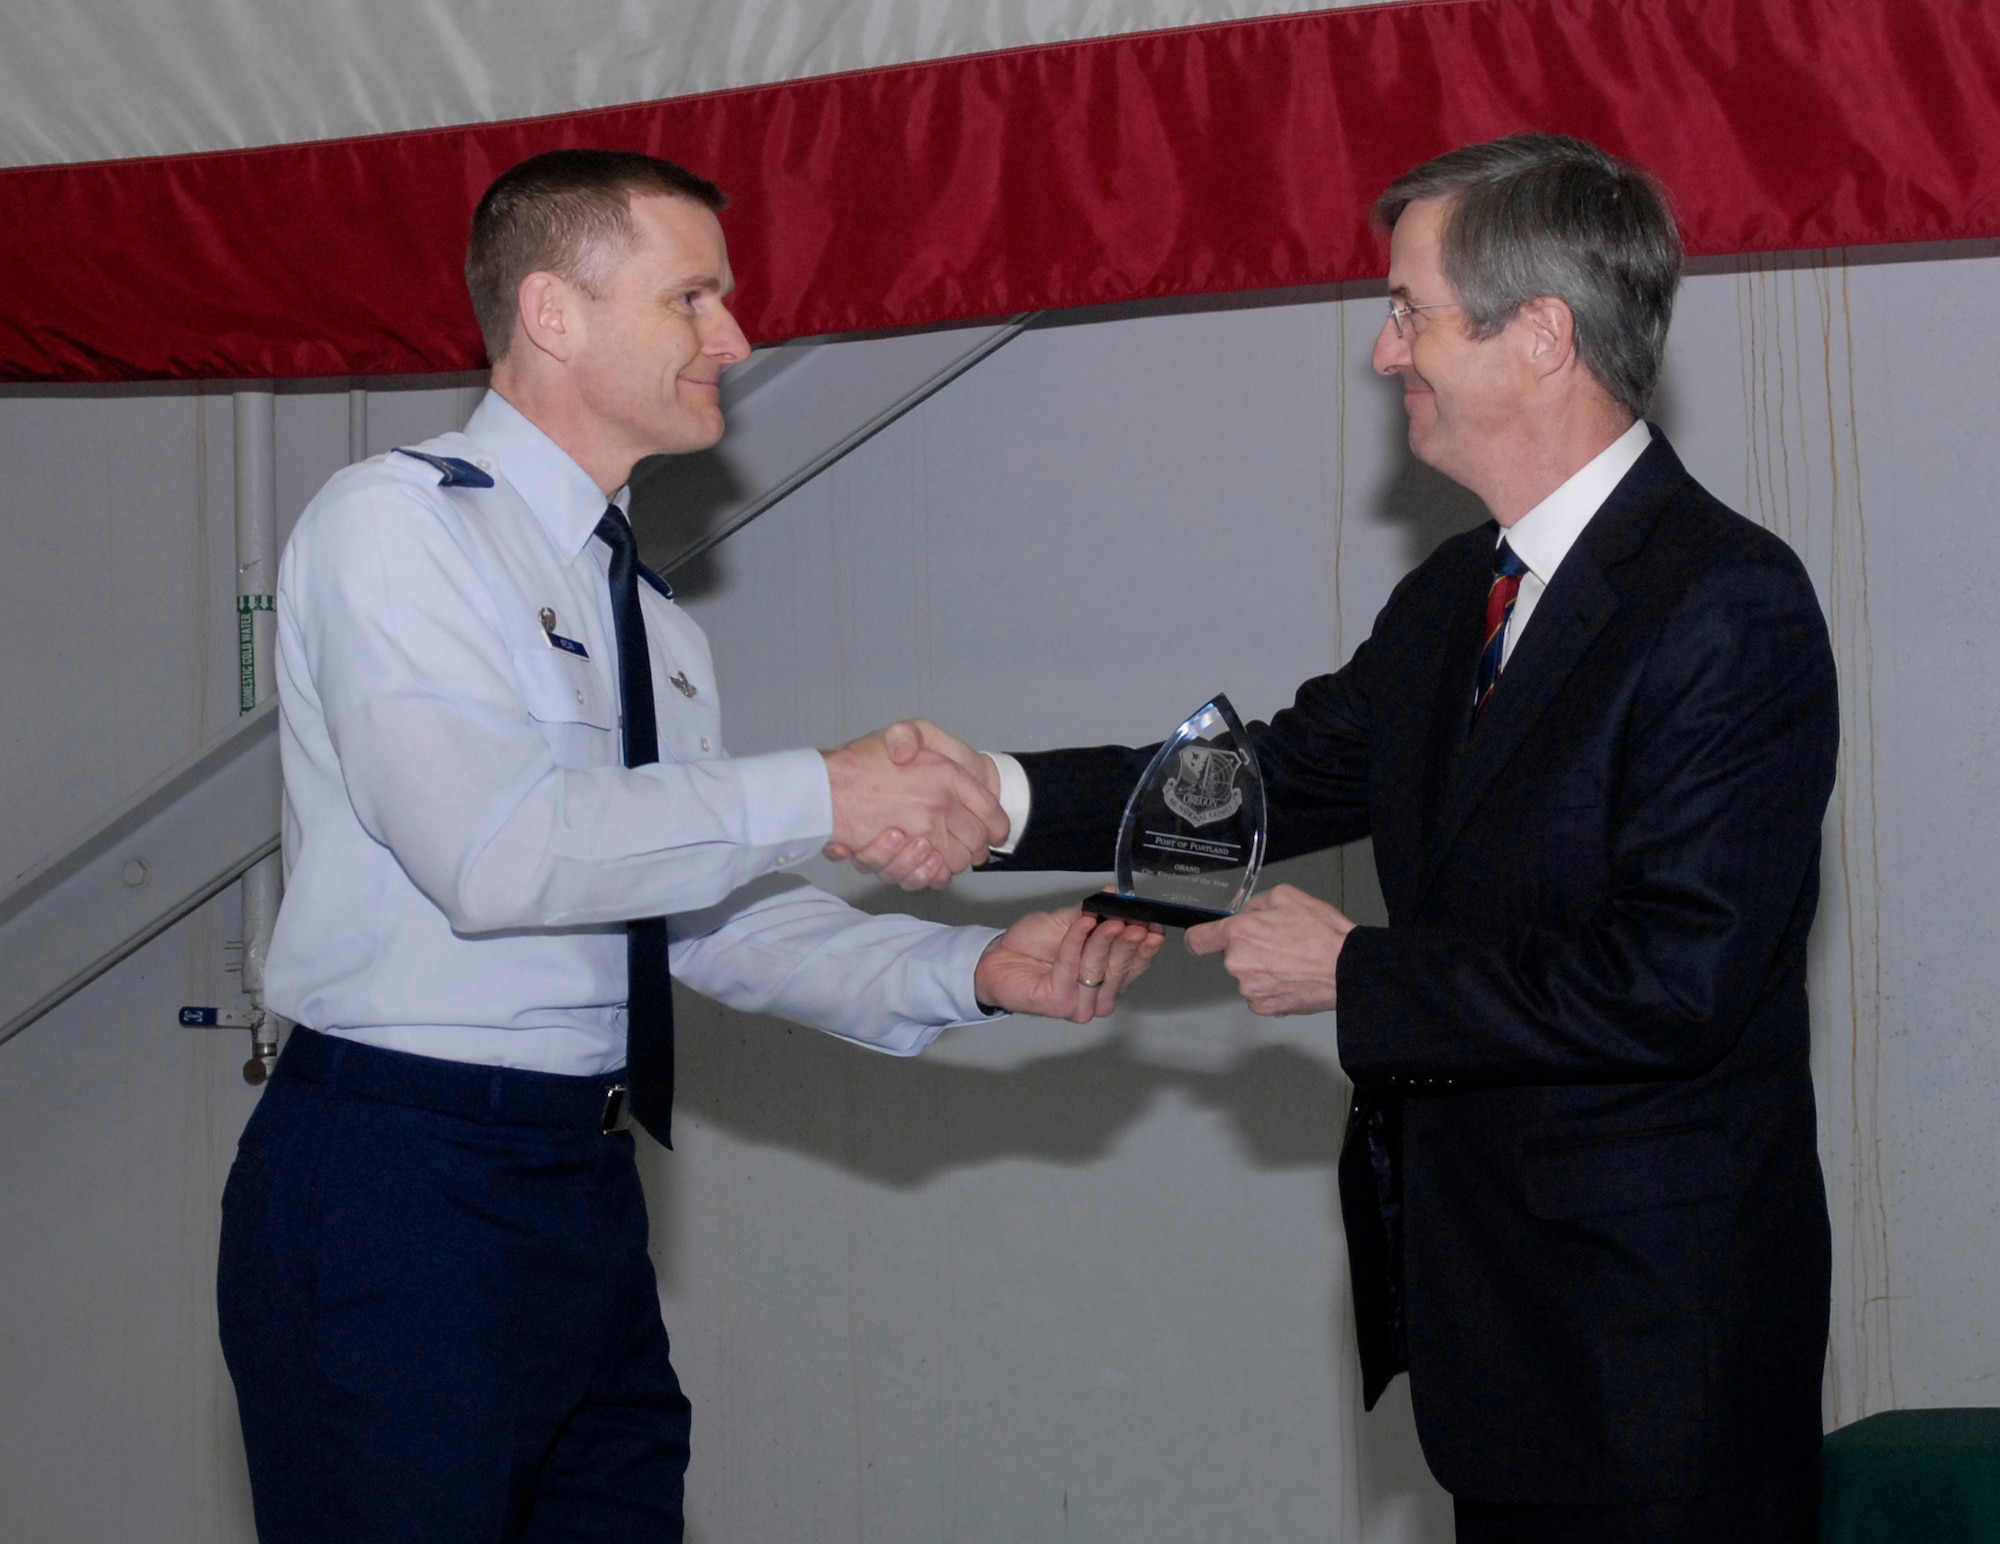 Oregon Air National Guard Col. Rick Wedan, 142nd Fighter Wing Commander, congratulates Mr. Bill Wyatt, Executive Director for the Port of Portland, during the ceremony for the Oregon Air National Guard Employer of the Year award for 2013, held at the Portland Air National Guard Base, Ore., Feb. 20, 2014. (Air National Guard photo by Tech. Sgt. John Hughel, 142nd Fighter Wing Public Affairs/Released)